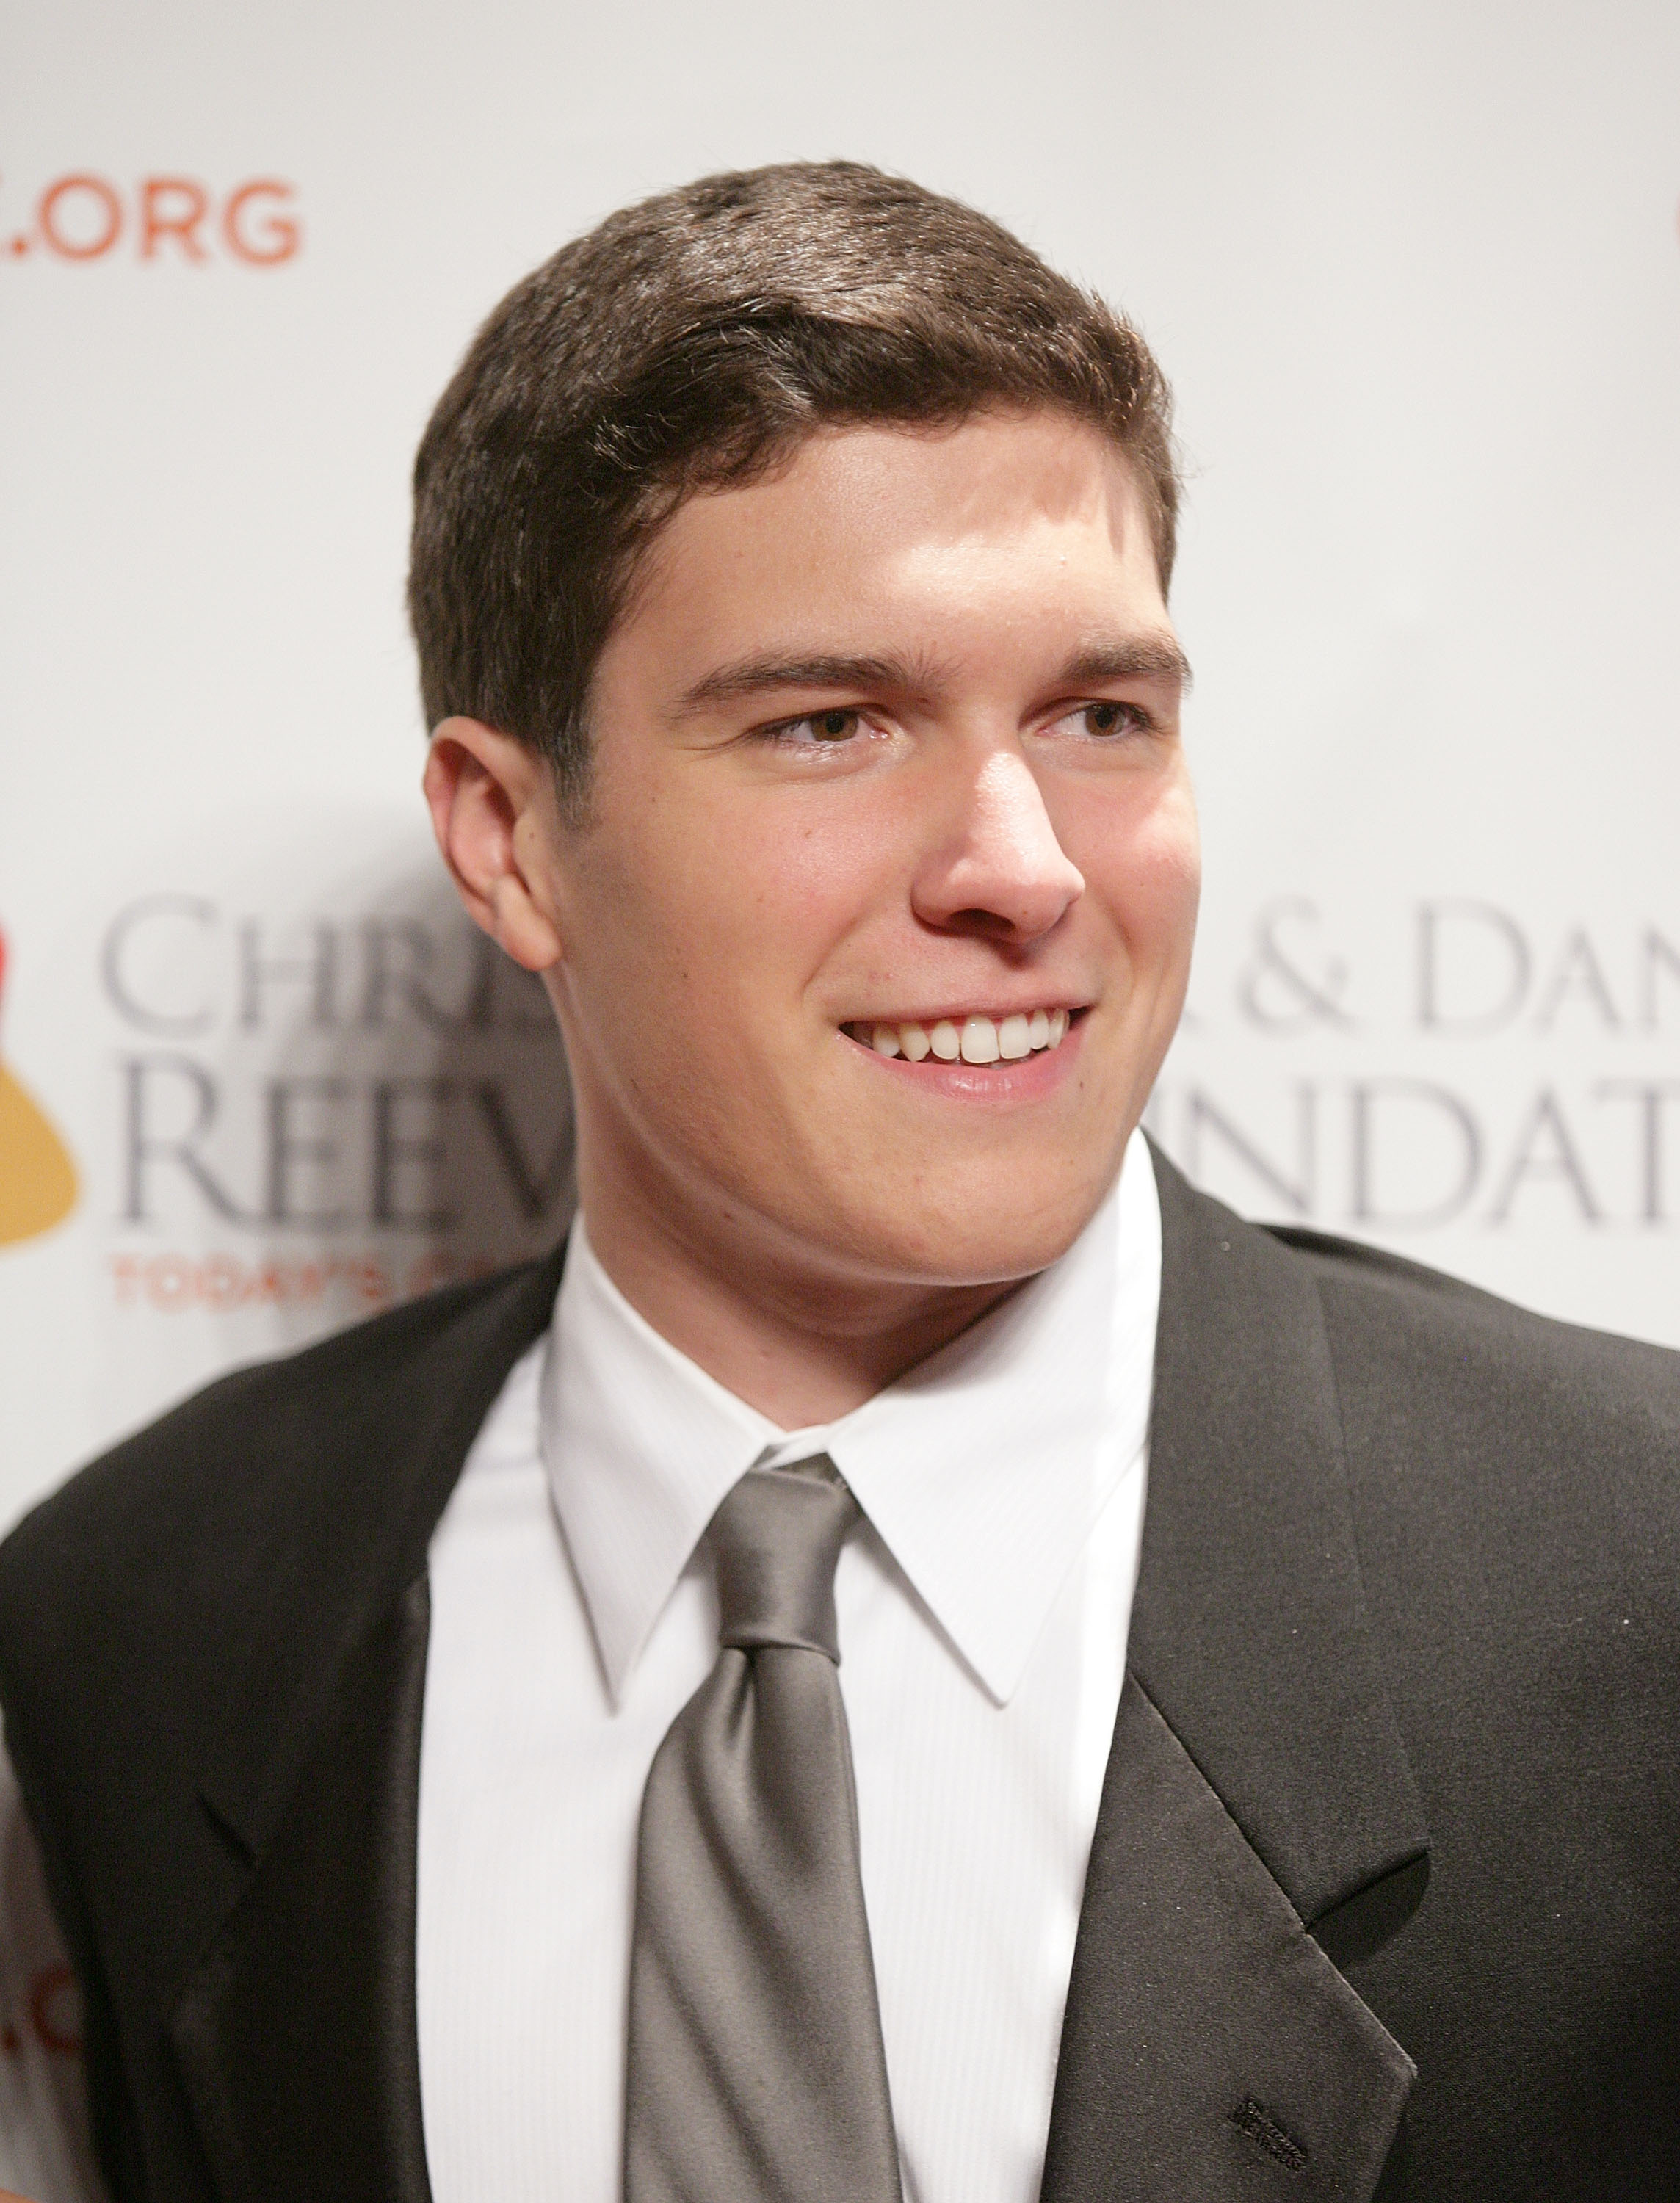 Will Reeve attends the 2011 Christopher & Dana Reeve Foundation's A Magical Evening benefit at Cipriani, Wall Street on November 30, 2011 in New York City | Source: Getty Images